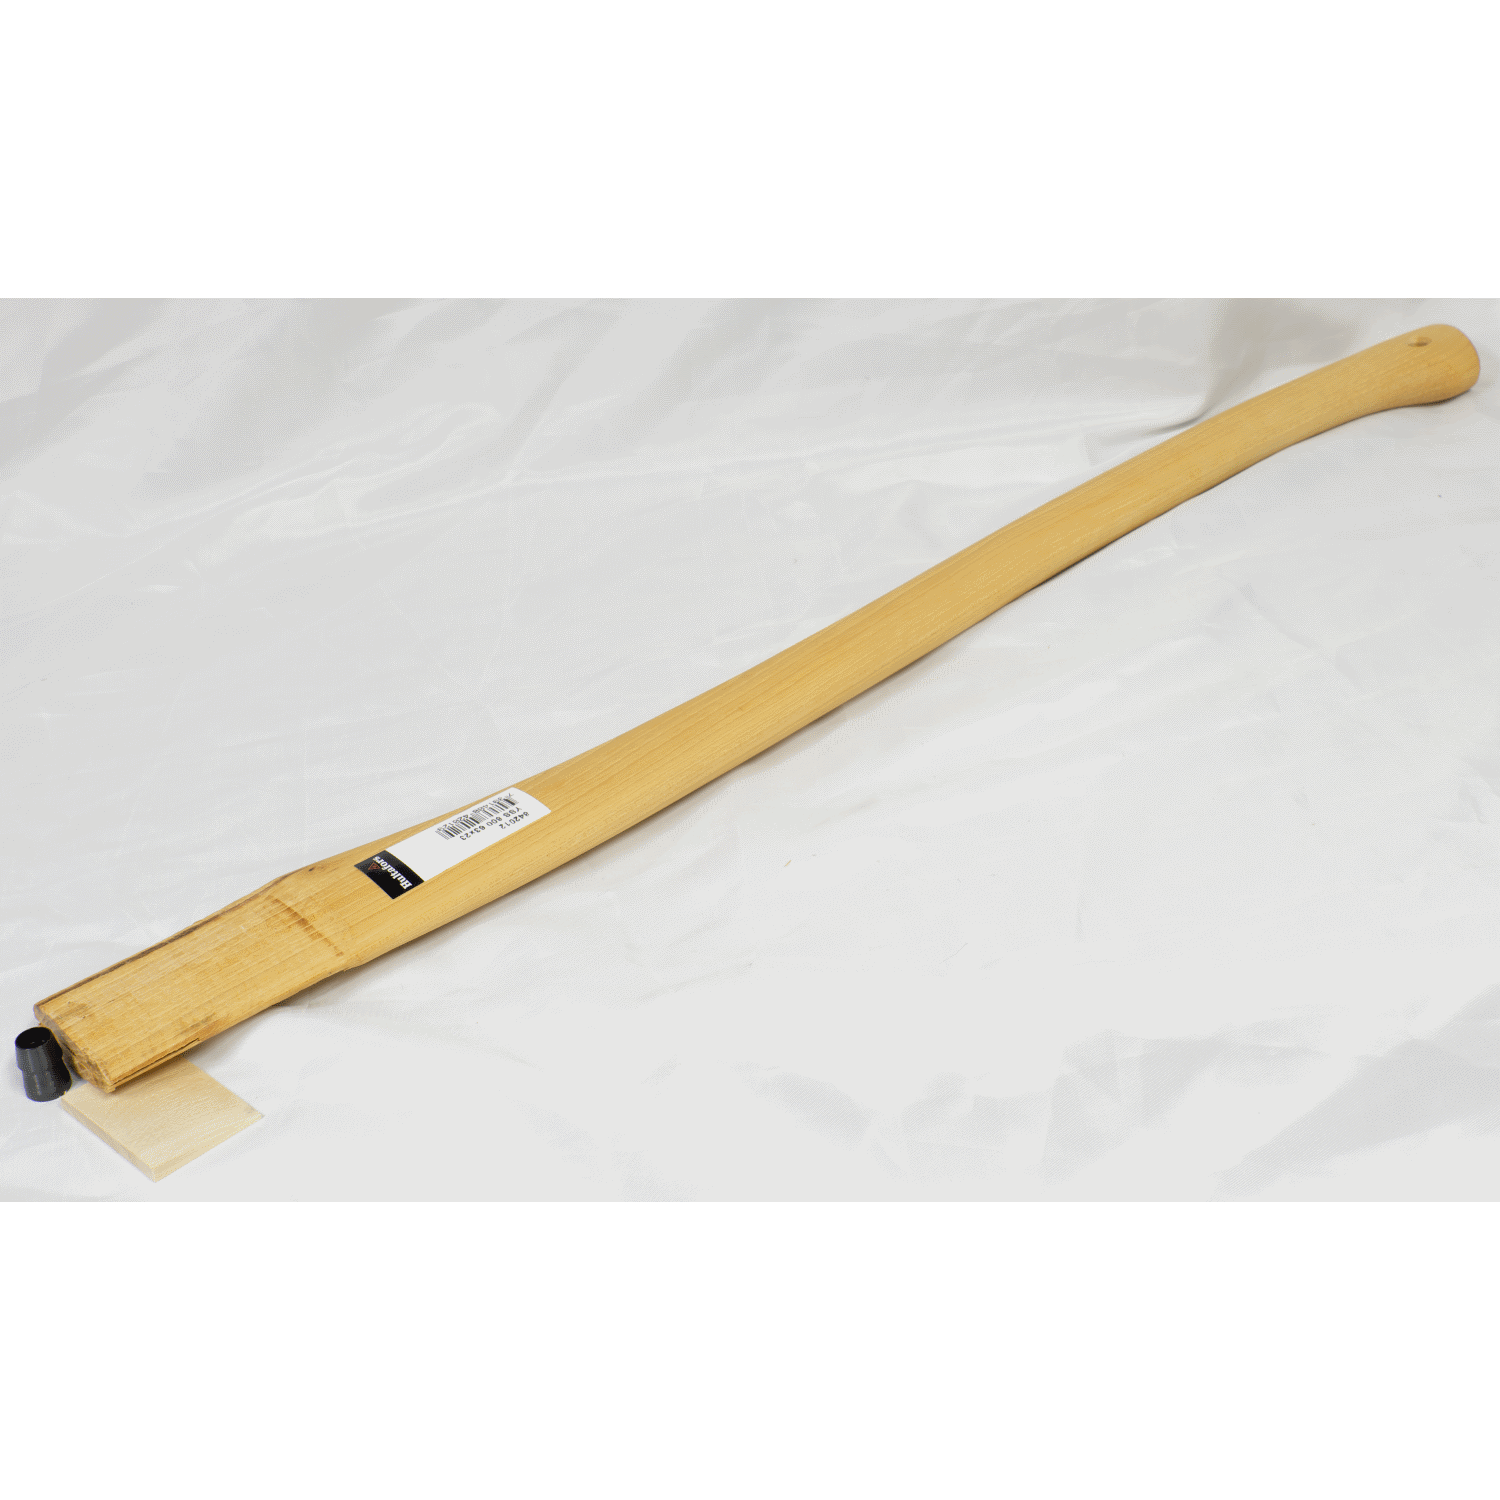 Spare Handle-Shaft for AGDOR Felling Axe, Montreal Pattern, Larger Model YSS 800 63x23 - Axeman.ca